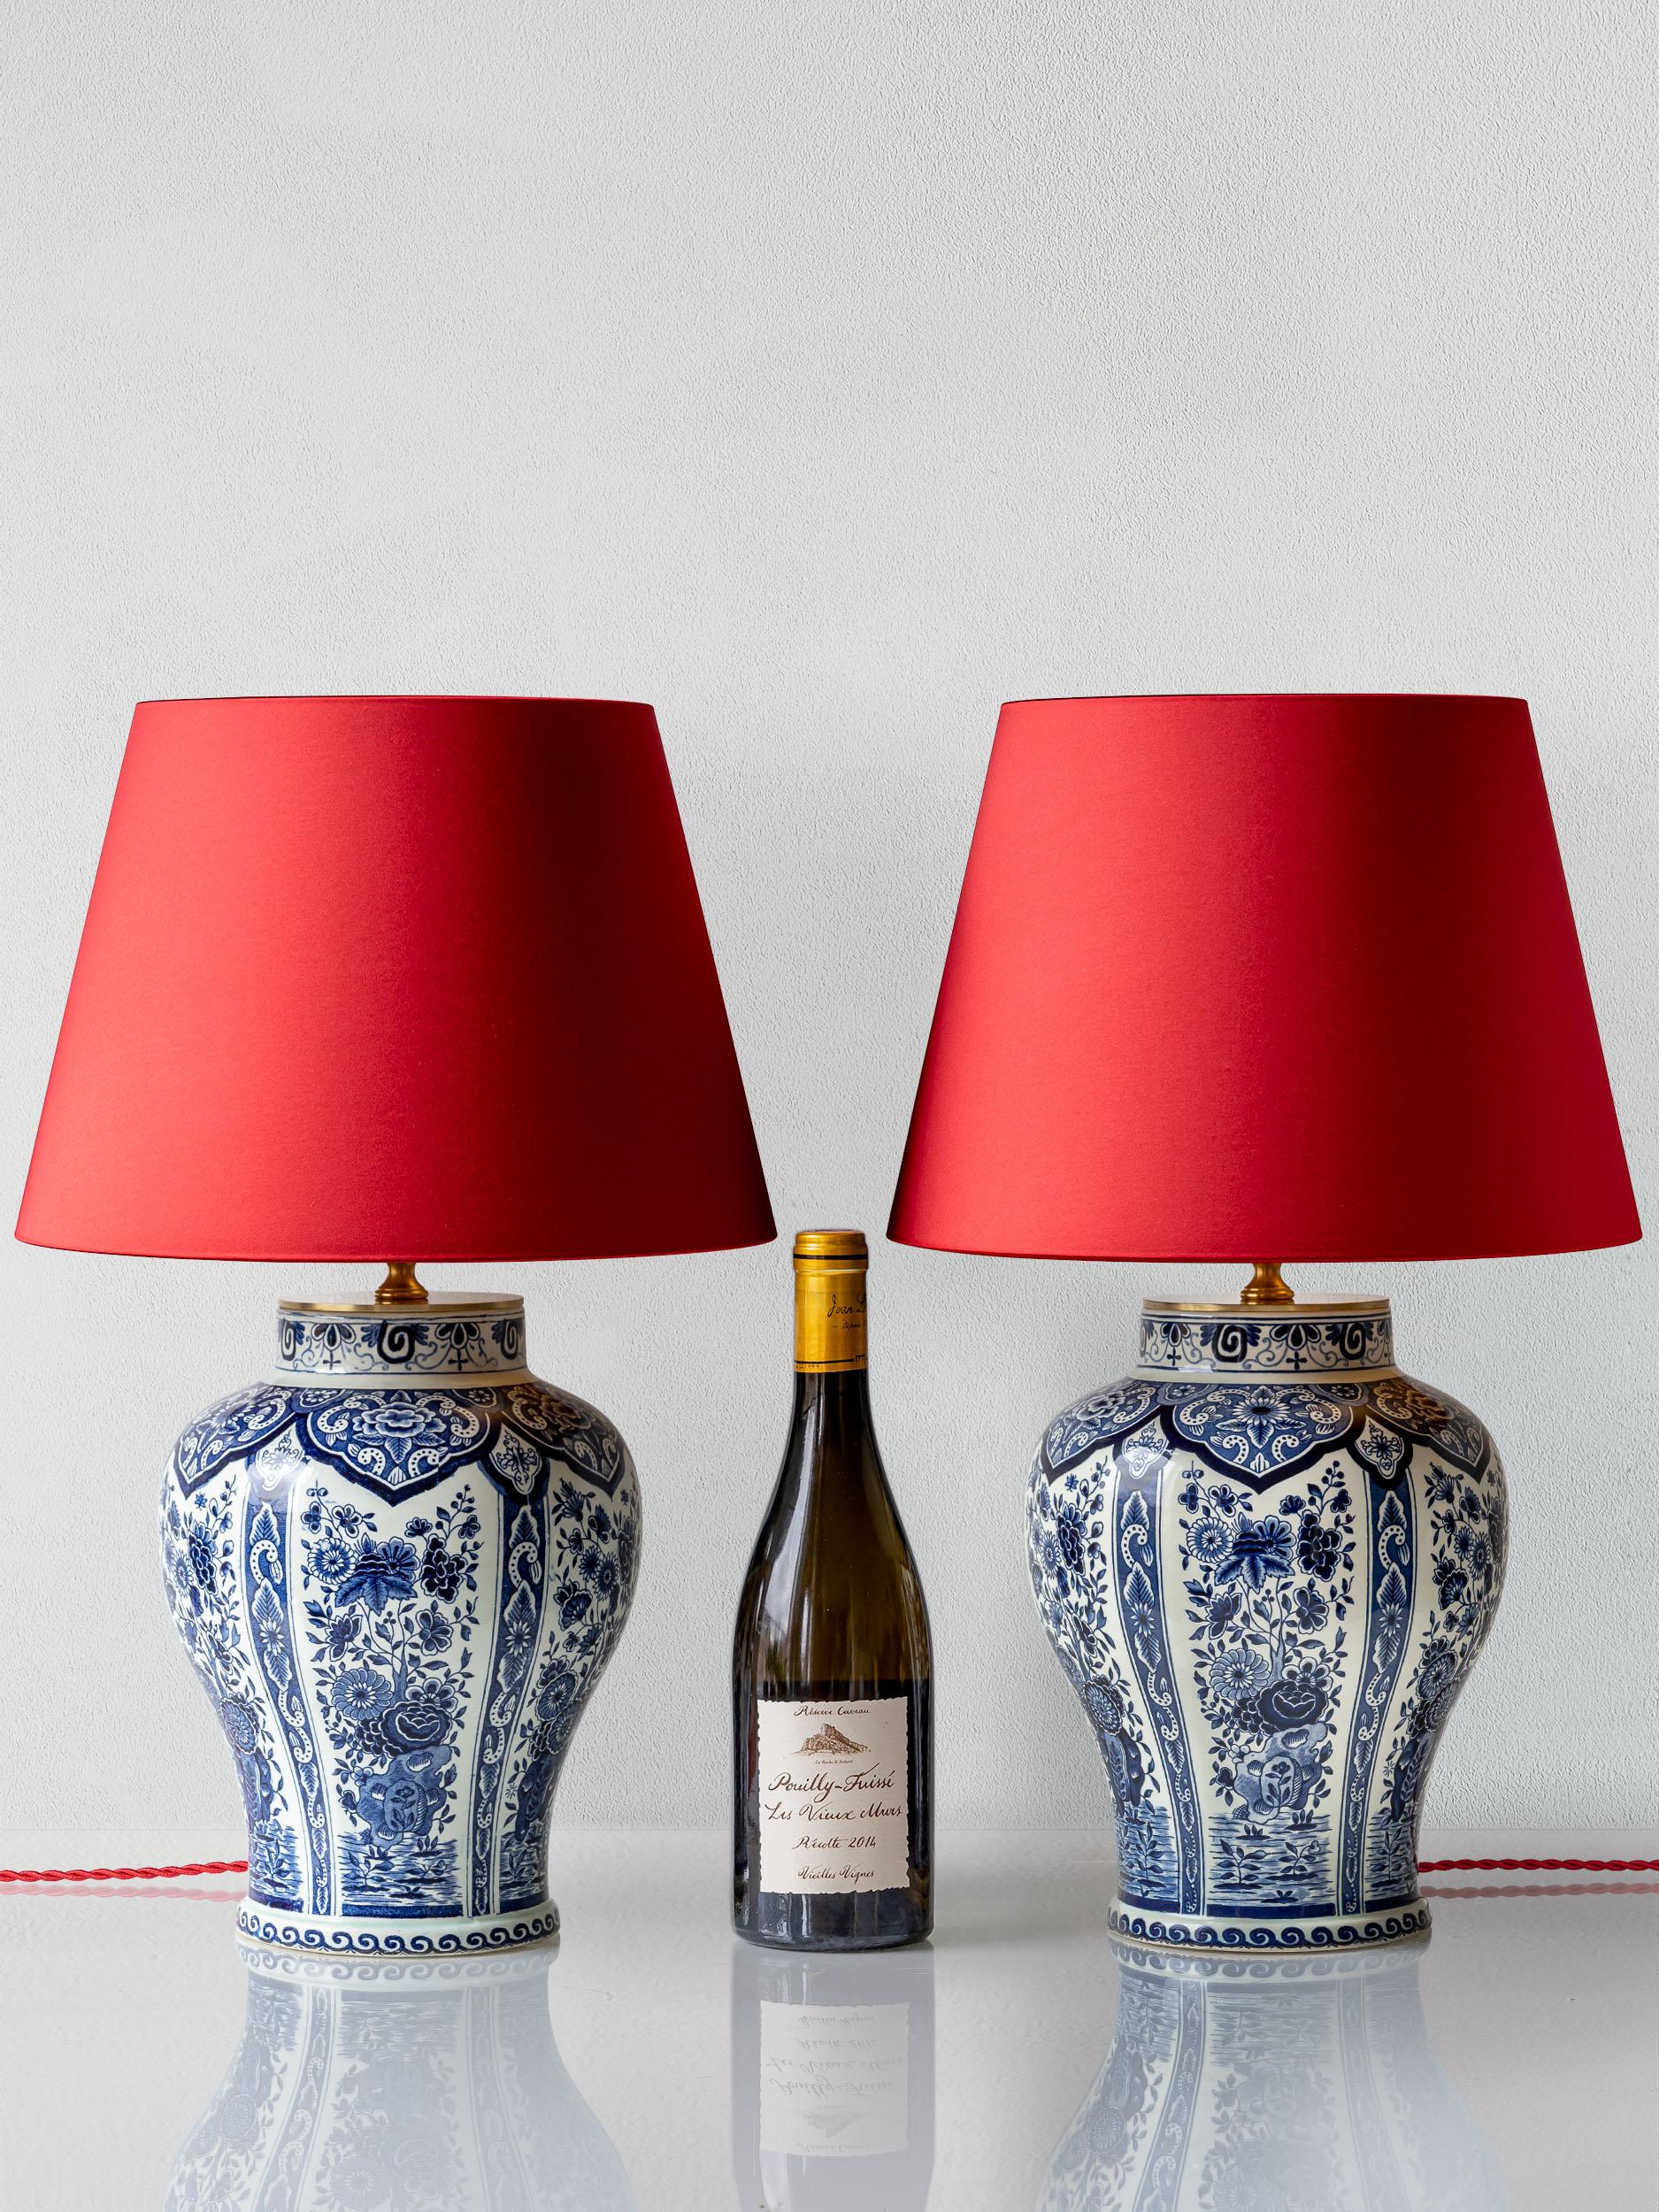 Chinoiserie Delft Blue Boch Frères Keramis Table Lamps, 1969-1979, Red Satin Shades For Sale